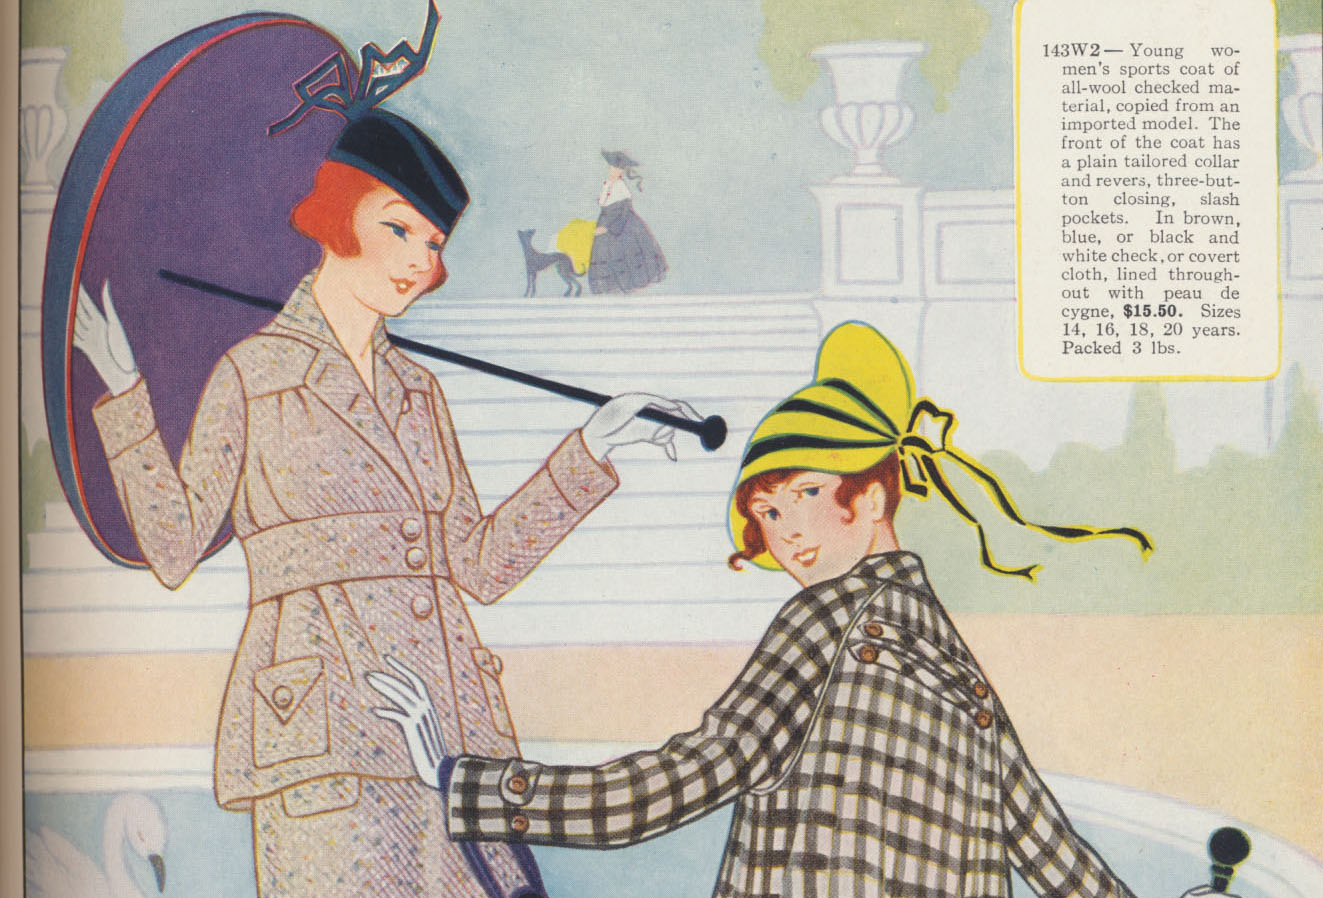 Spring Styles for 1915 from the Standard Mail Order Co. - The